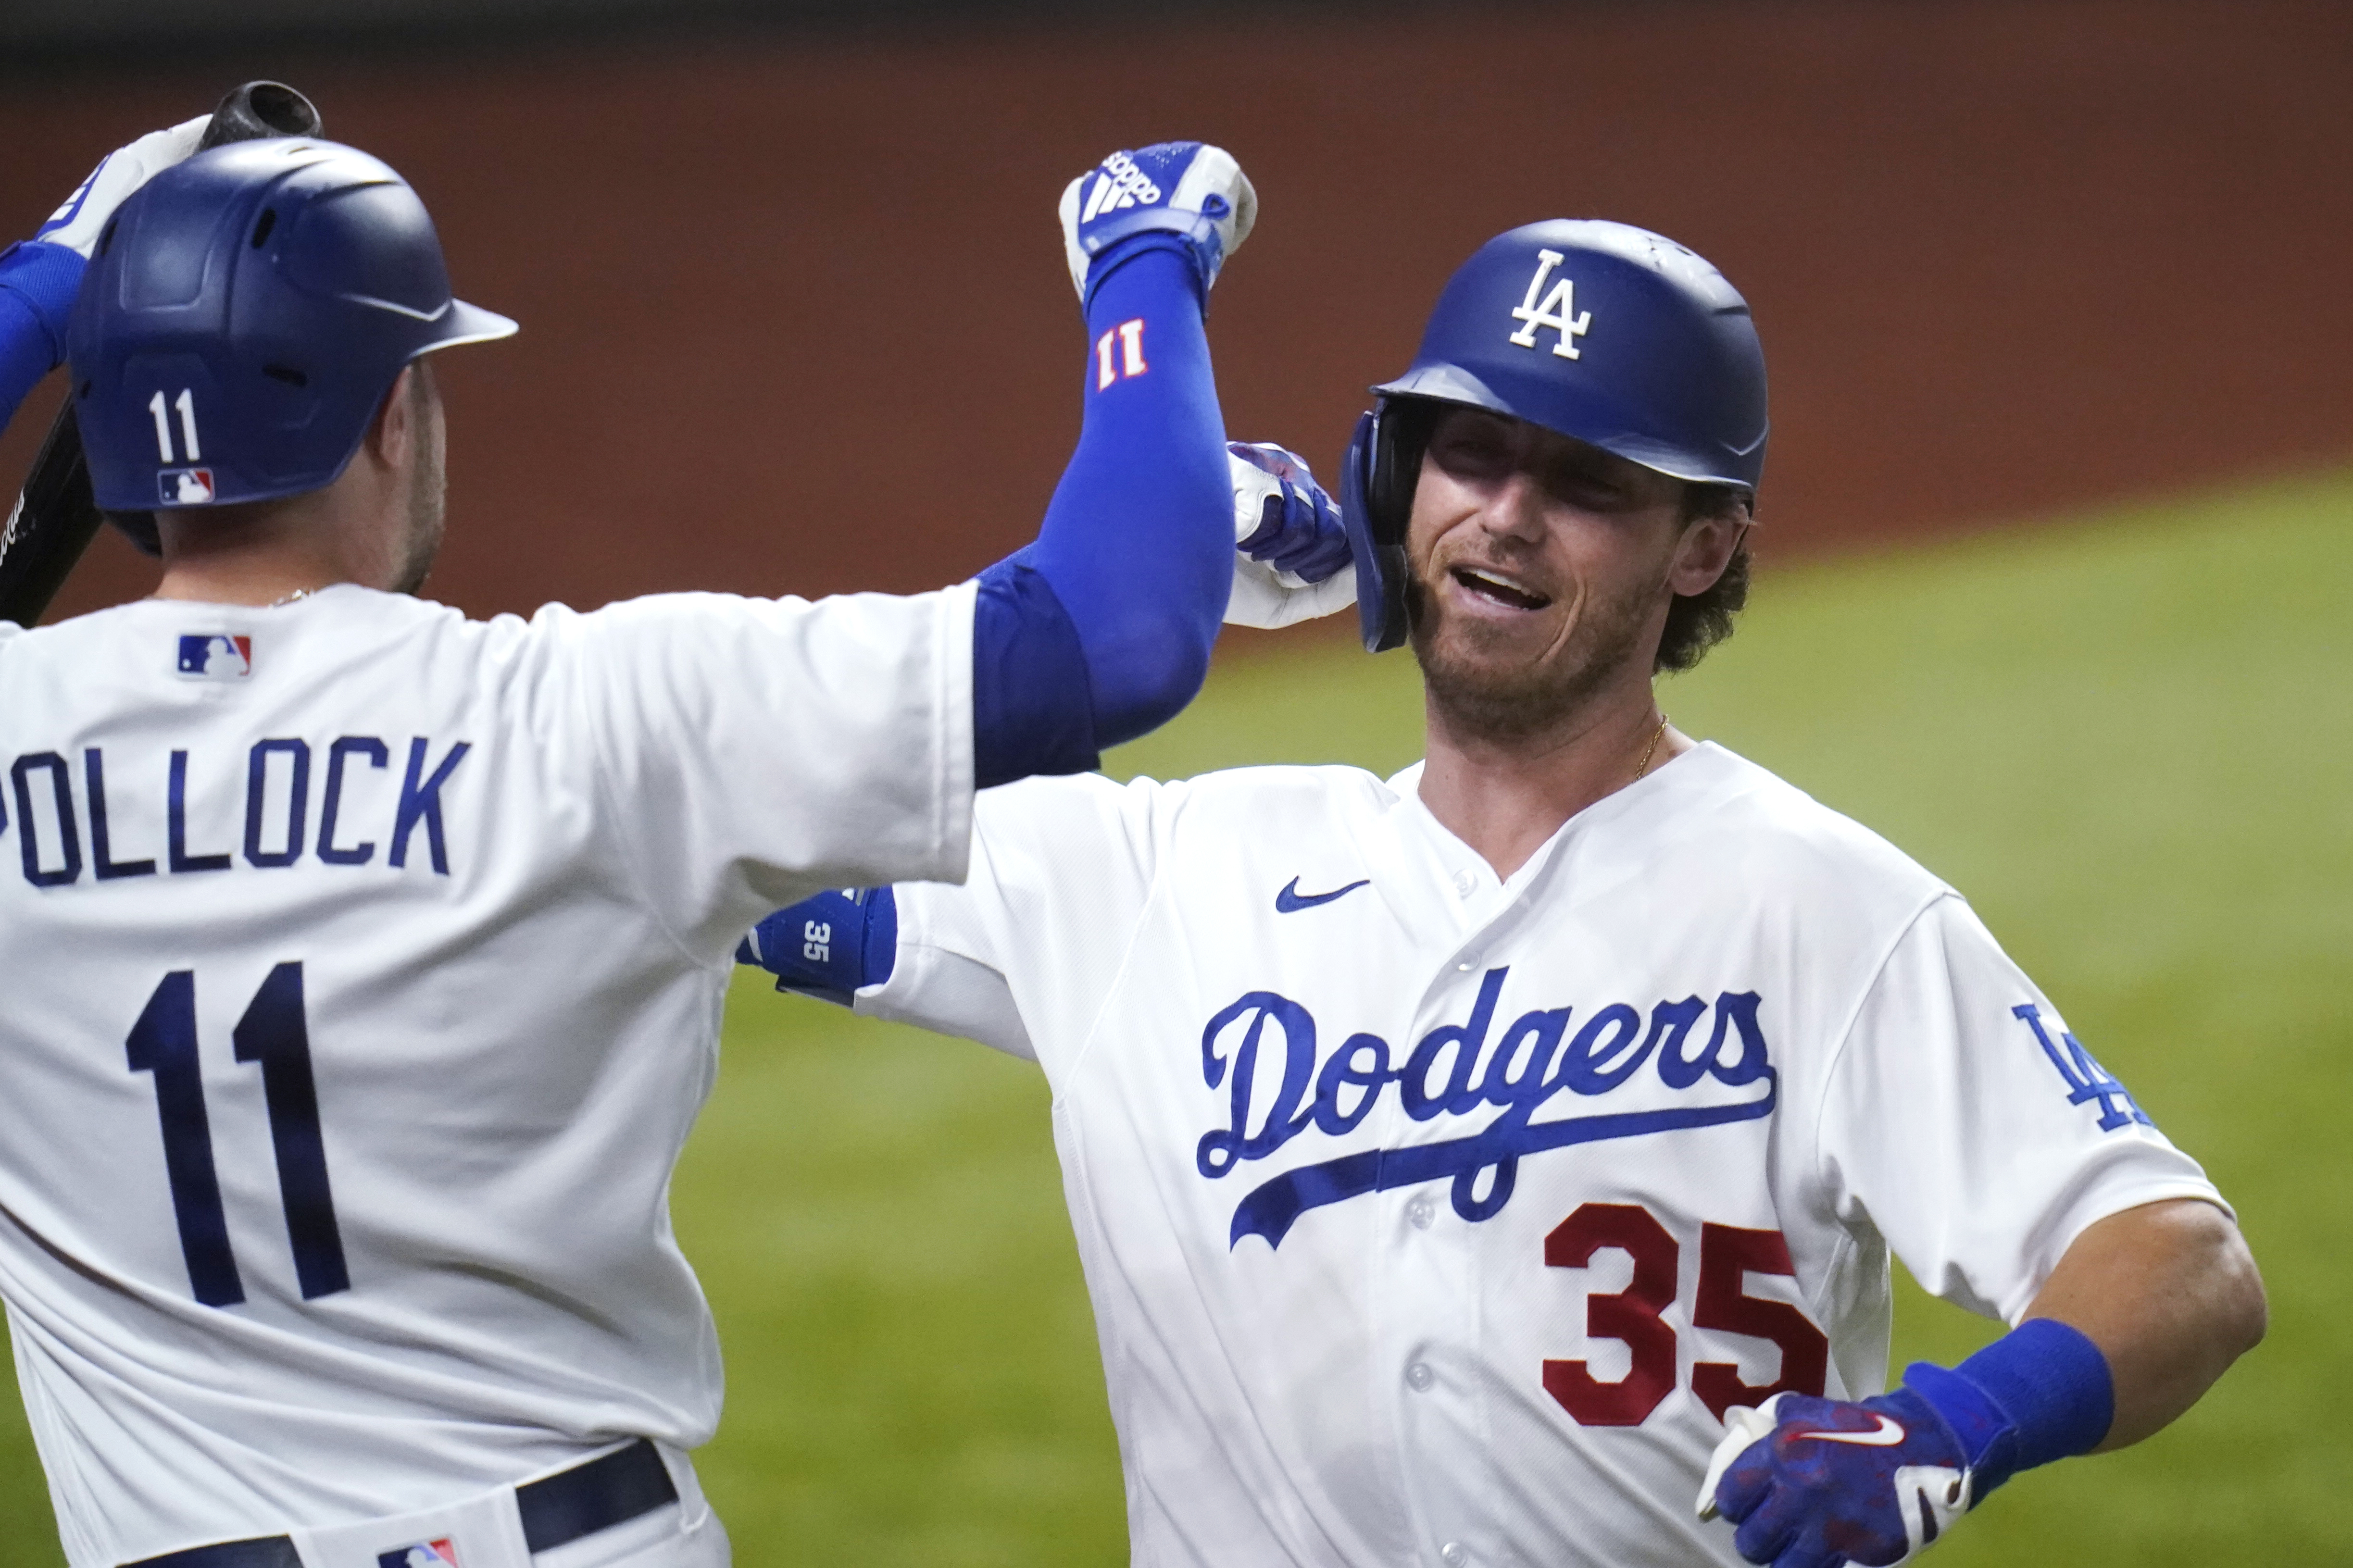 Cody Bellinger's two-run double sparks Dodgers in Game 2 of NLDS